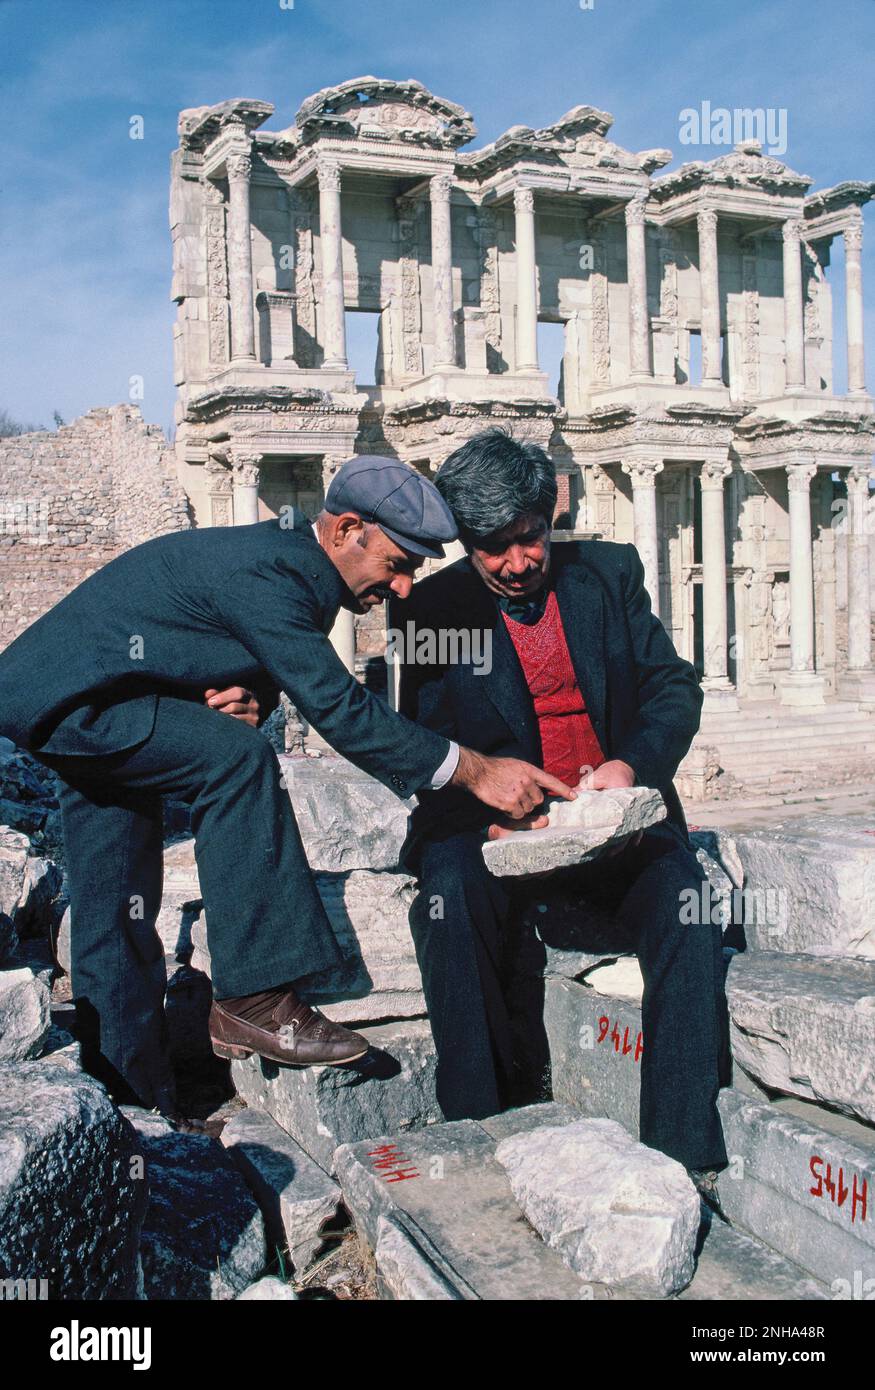 Turkey. Ephesus ruins. Two local male archaeologists studying stone pieces. Stock Photo